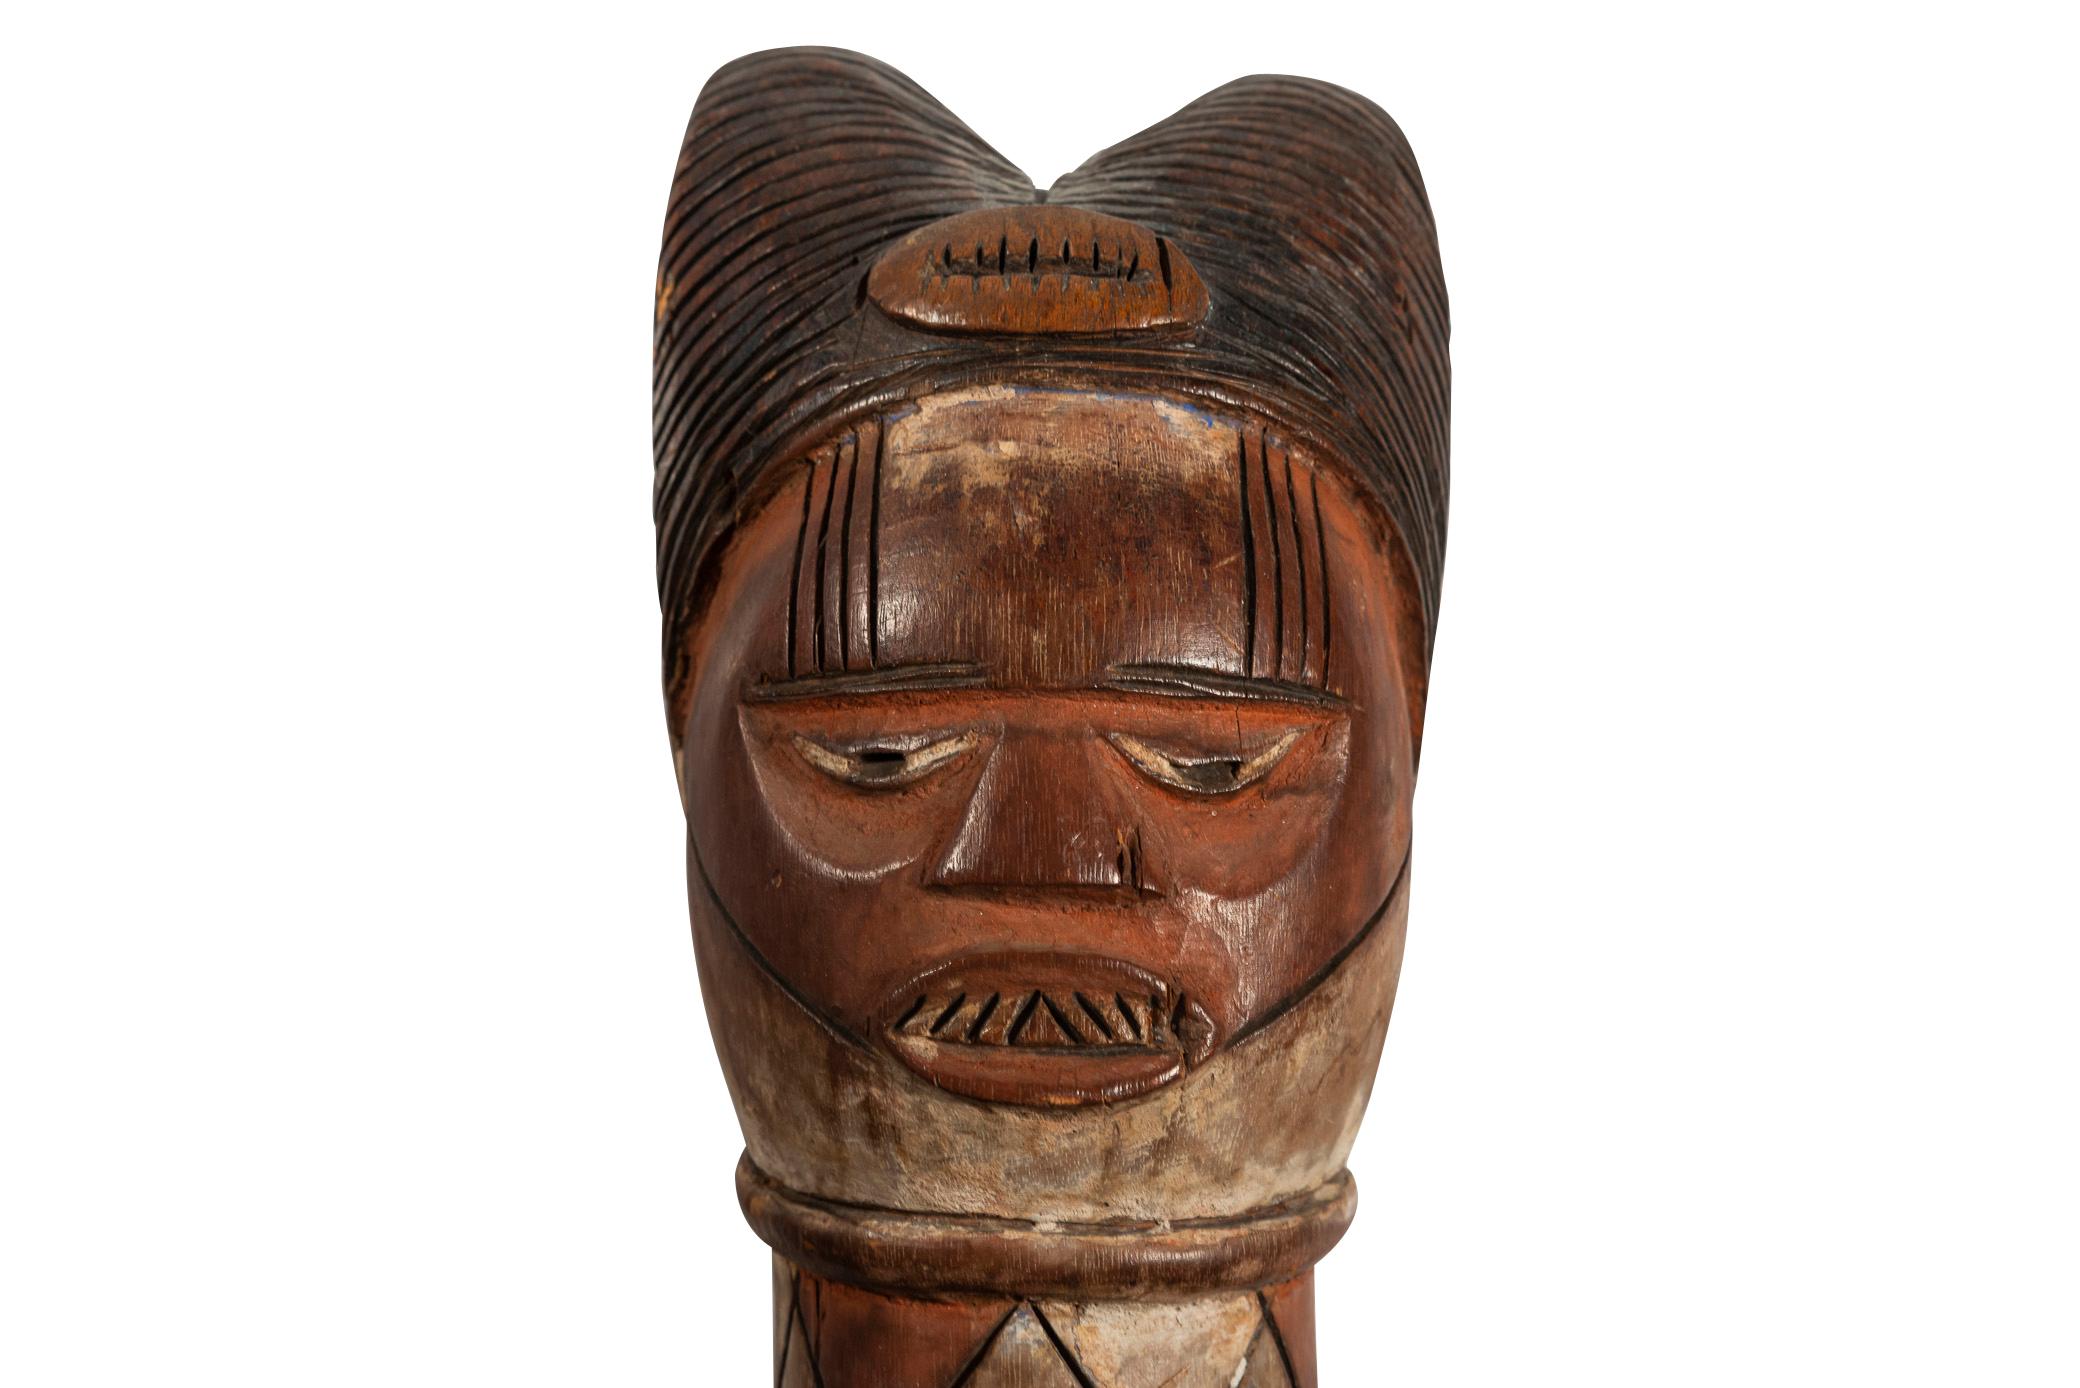 Kuyu puppet head,
Wood and white pigments,
The cylindrical handle supporting a rounded head with almond-shaped eyes, the half-open mouth revealing teeth, the neck with rows of geometric patterns, the double bun hairstyle, the face and the skull